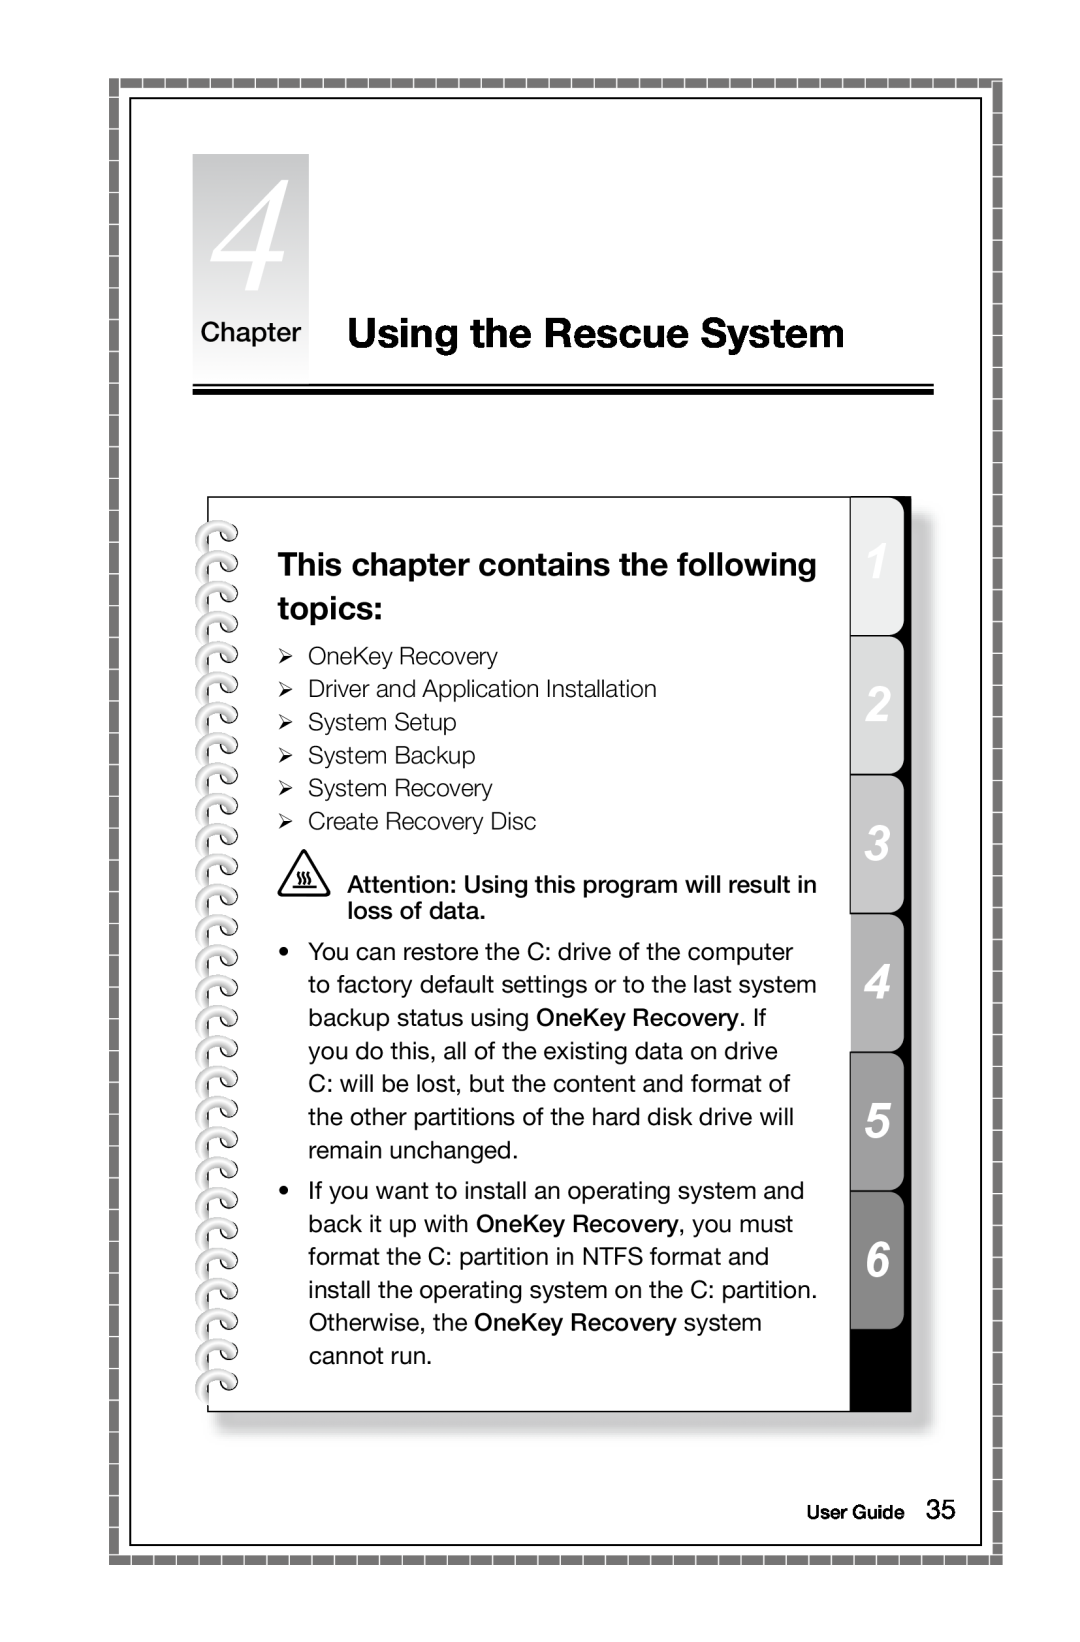 Lenovo 2566 [B340] 10099, 97, 4749 [B545] manual Chapter Using the Rescue System, This chapter contains the following topics 